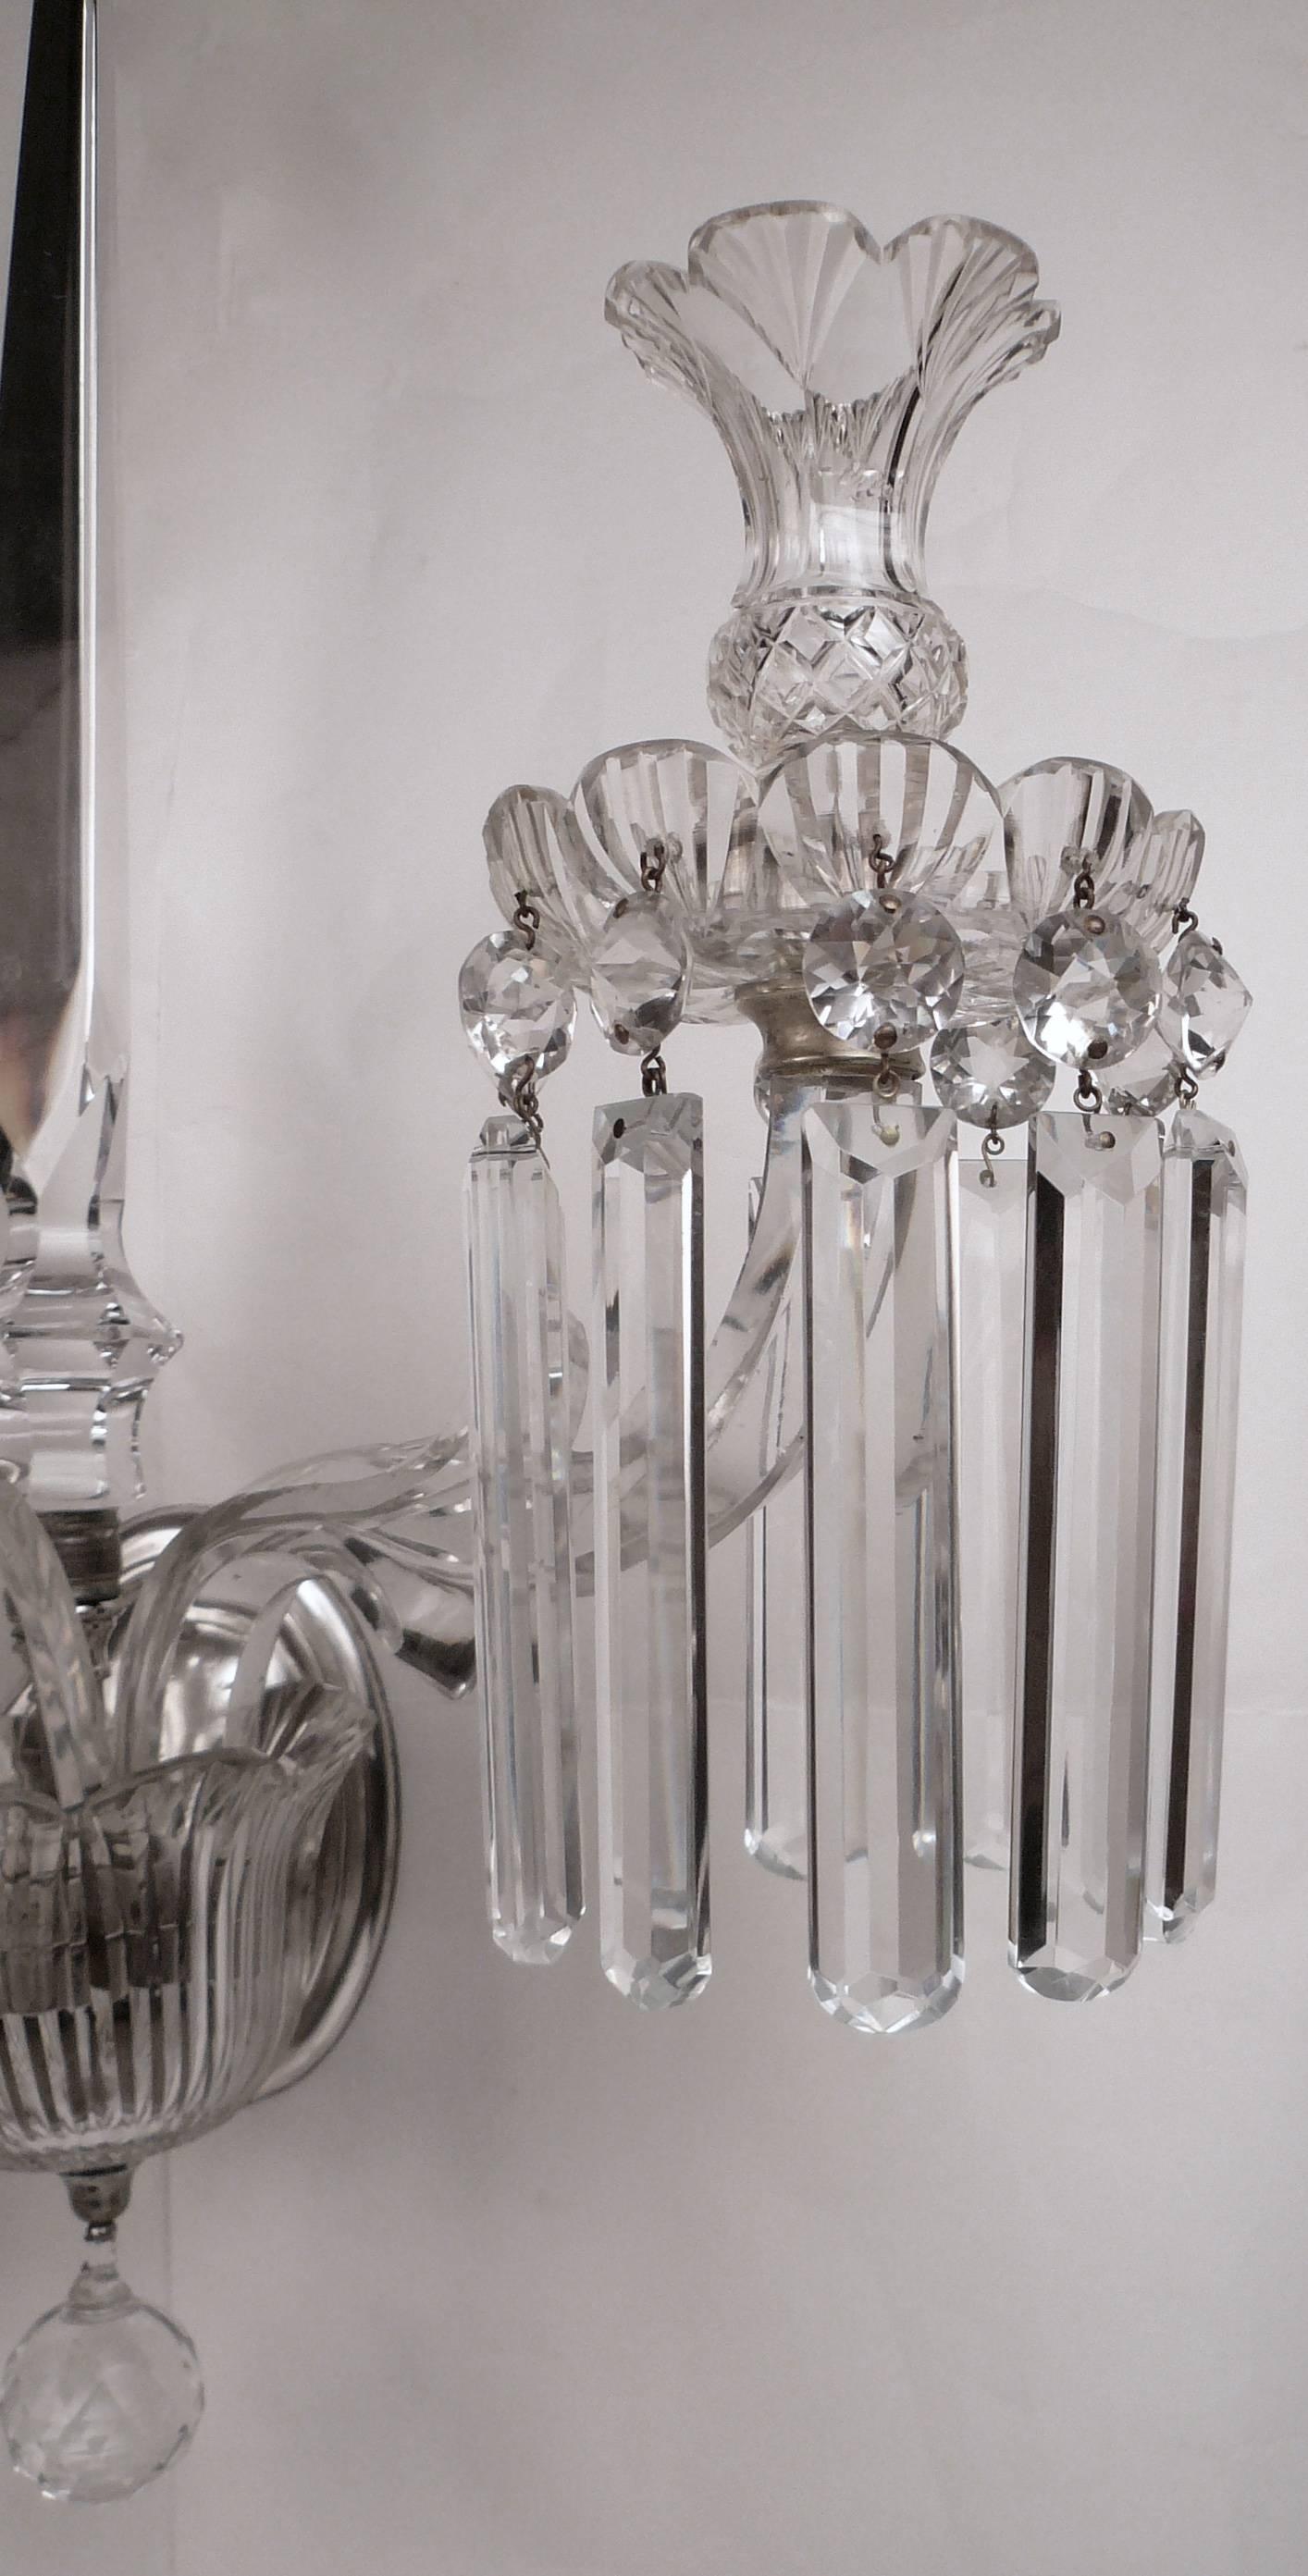 This huge candle powered three arm sconce features rule cut prisms with jewel cut rondels, and silver plated fittings.